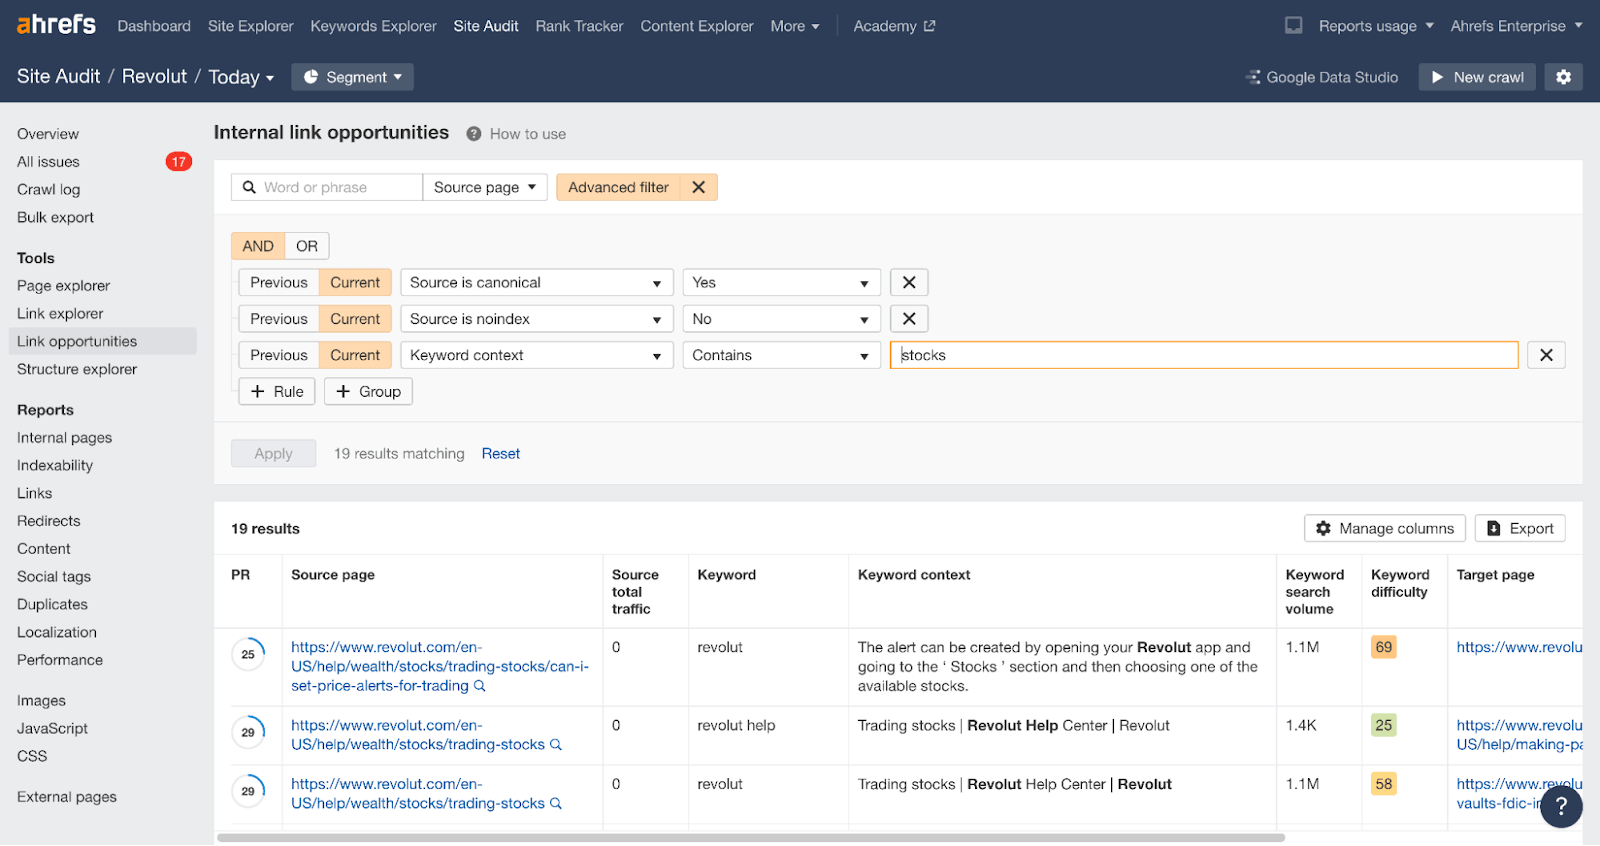 Ahrefs example of how to find internal link opportunities